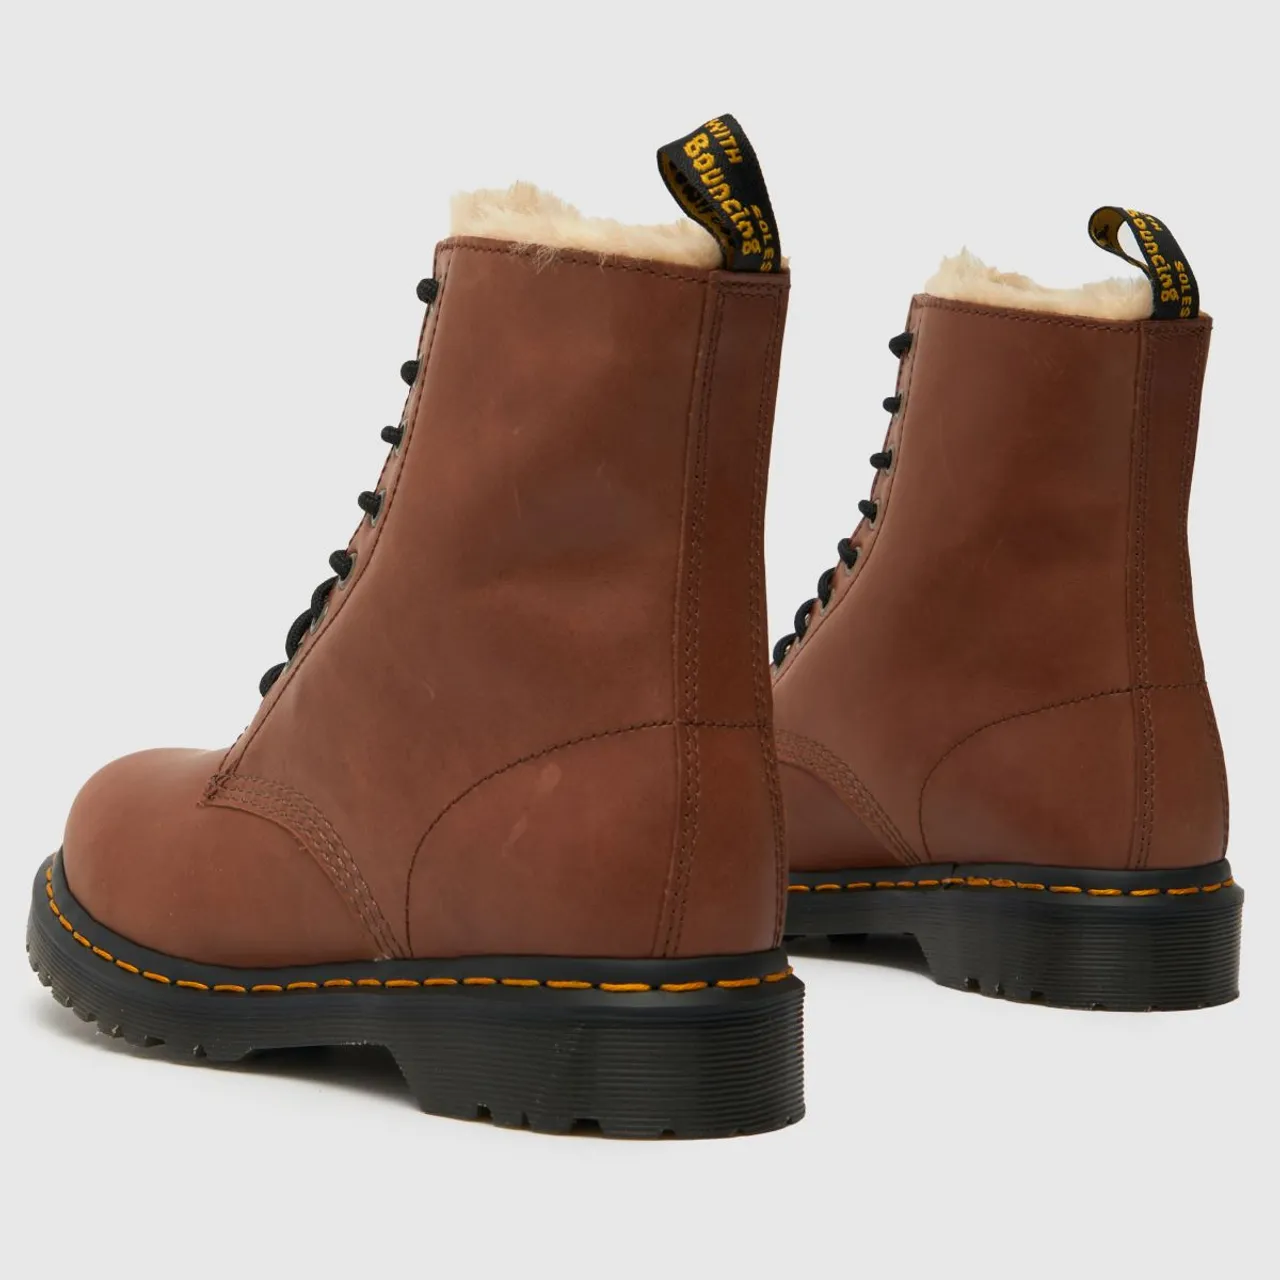 Dr Martens 1460 Serena Boots In Tan